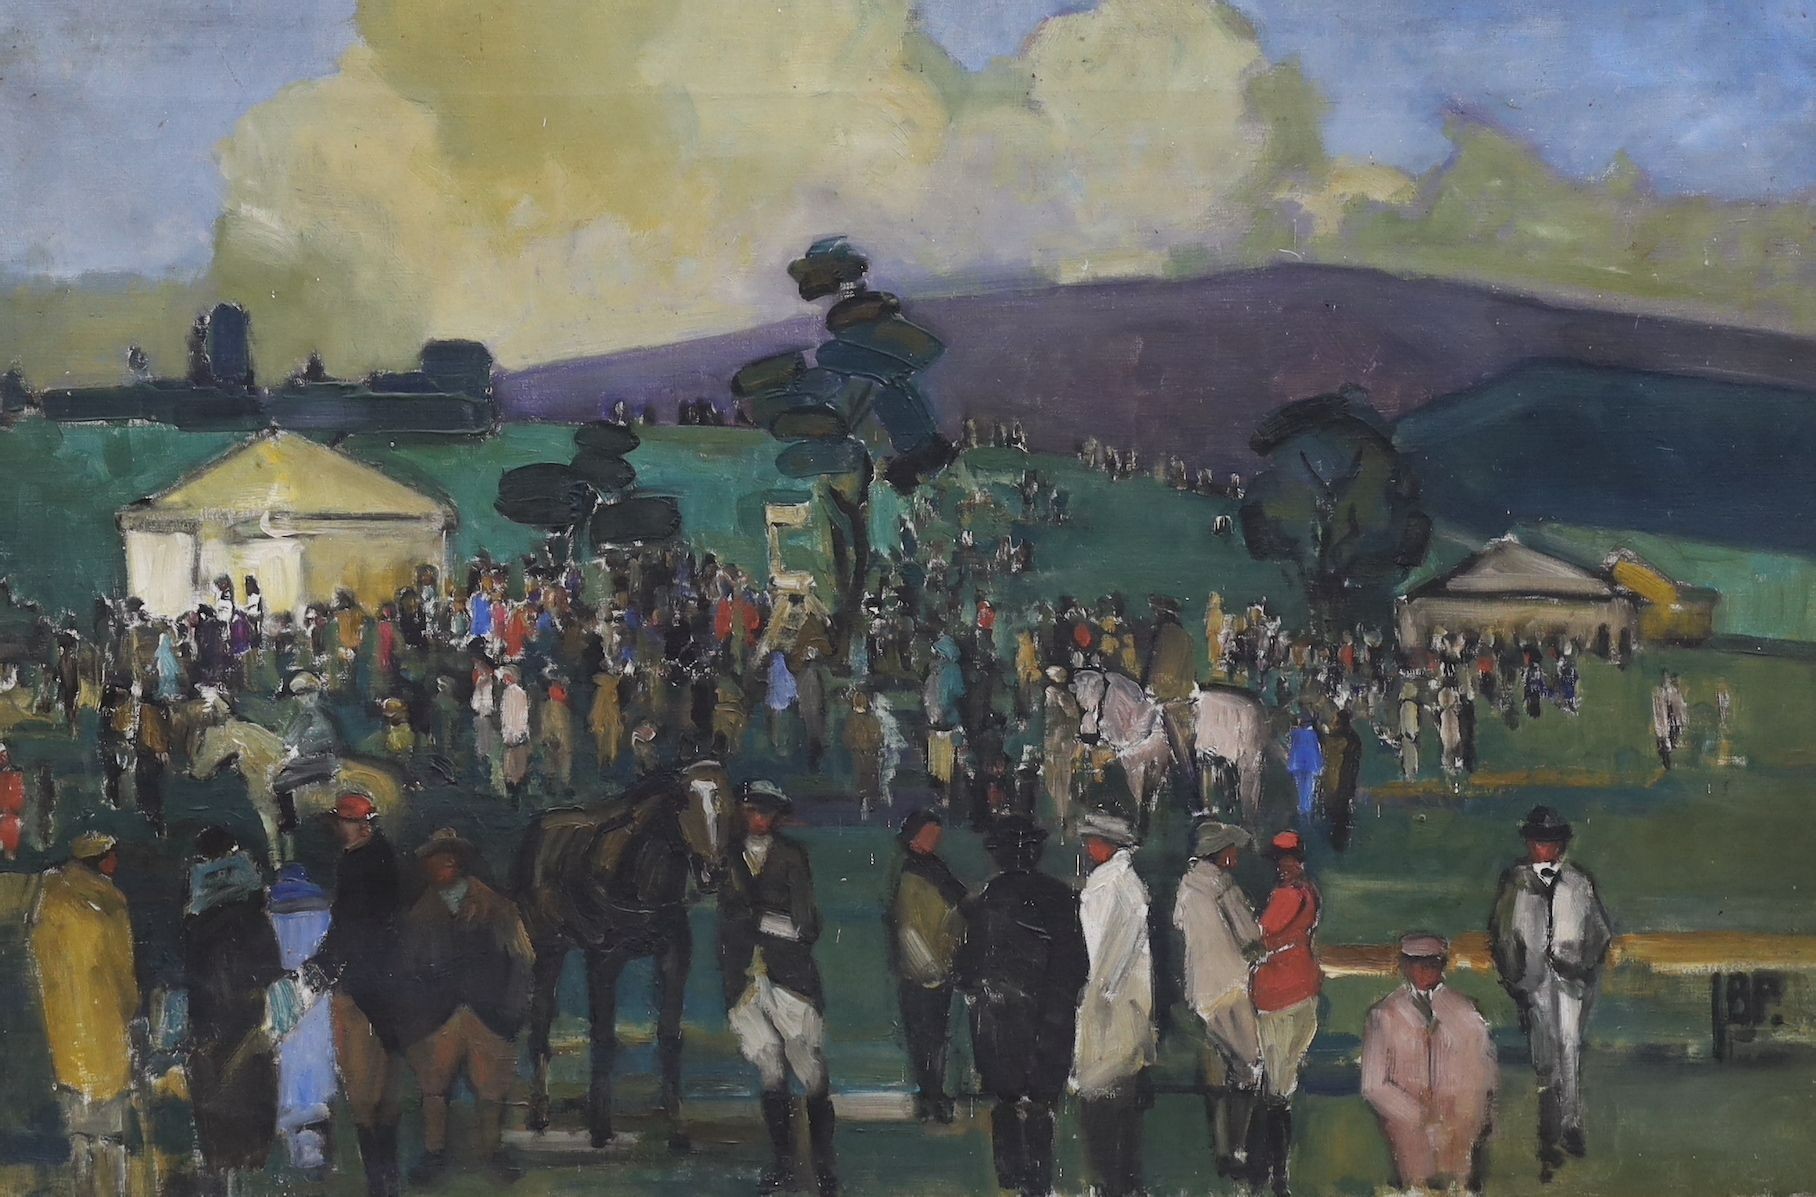 Attributed to Bertram Priestman (1868-1951), oil on canvas, Sketch of a race meeting, initialled, 51 x 76cm, unframed